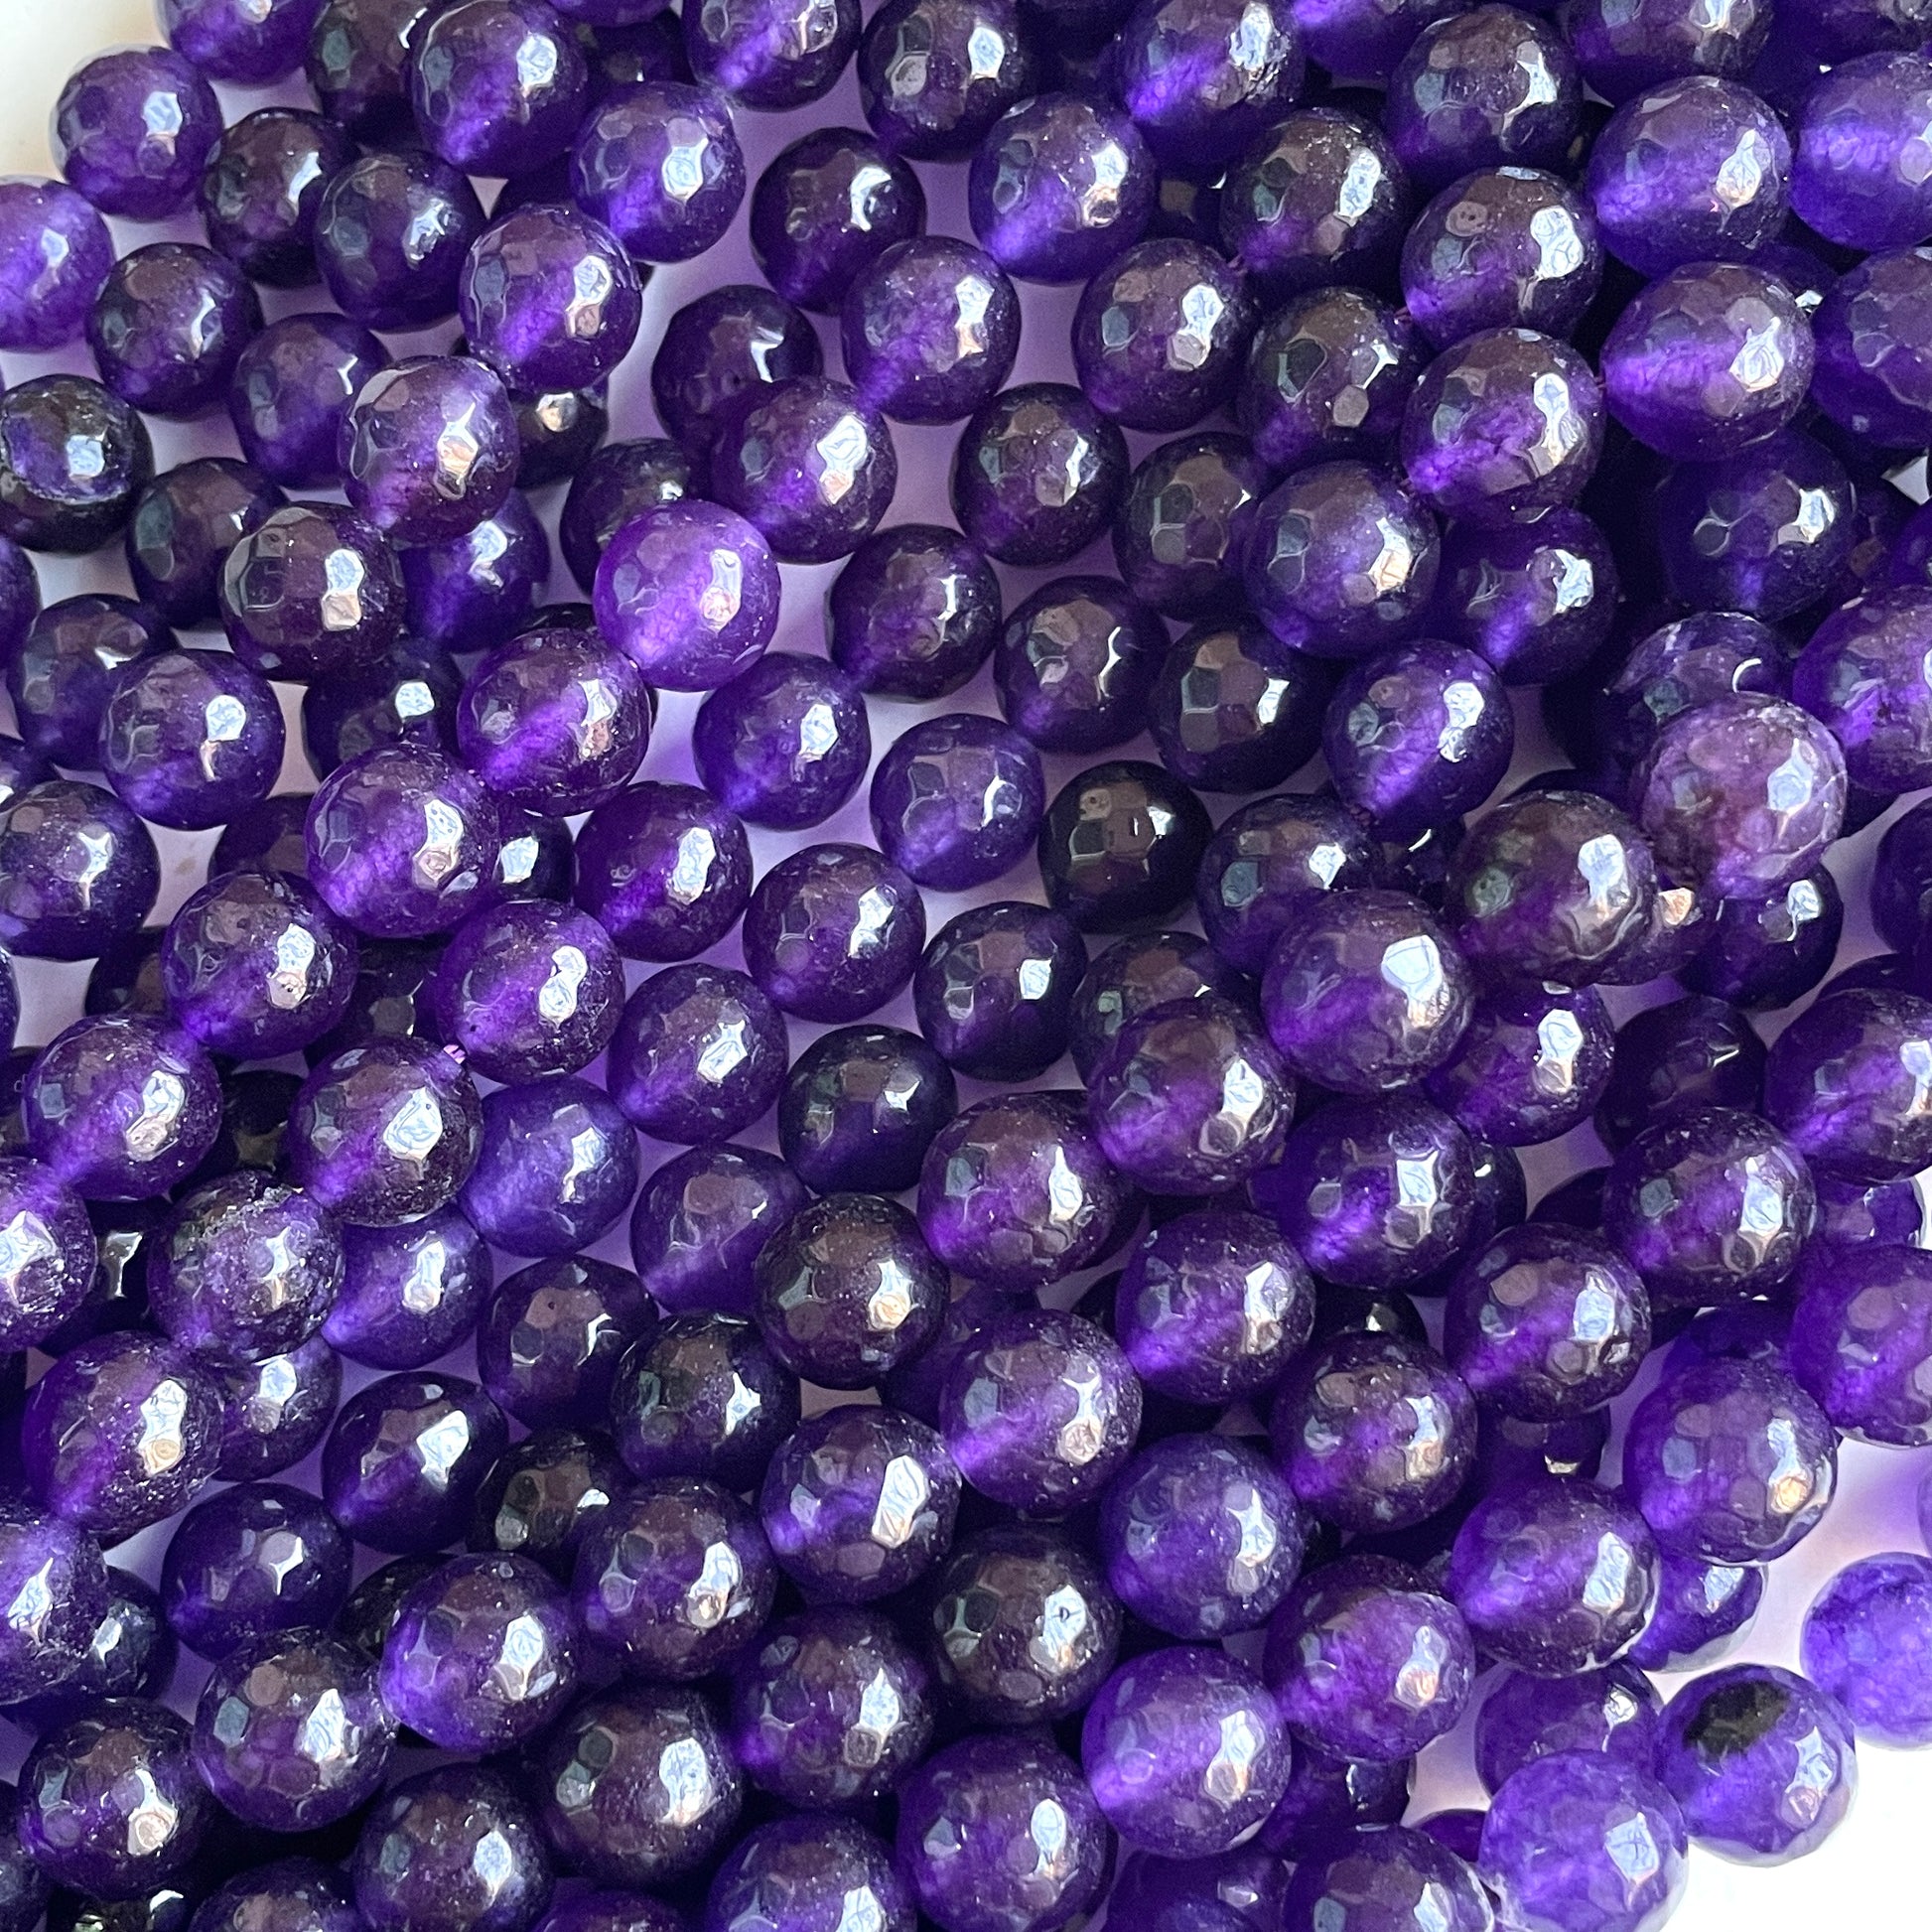 2 Strands/lot 10mm Mardi Gras Color Yellow Green Purple Jade Faceted Stone Beads 2 Strands Purple Stone Beads Mardi Gras New Beads Arrivals Round Jade Beads Charms Beads Beyond